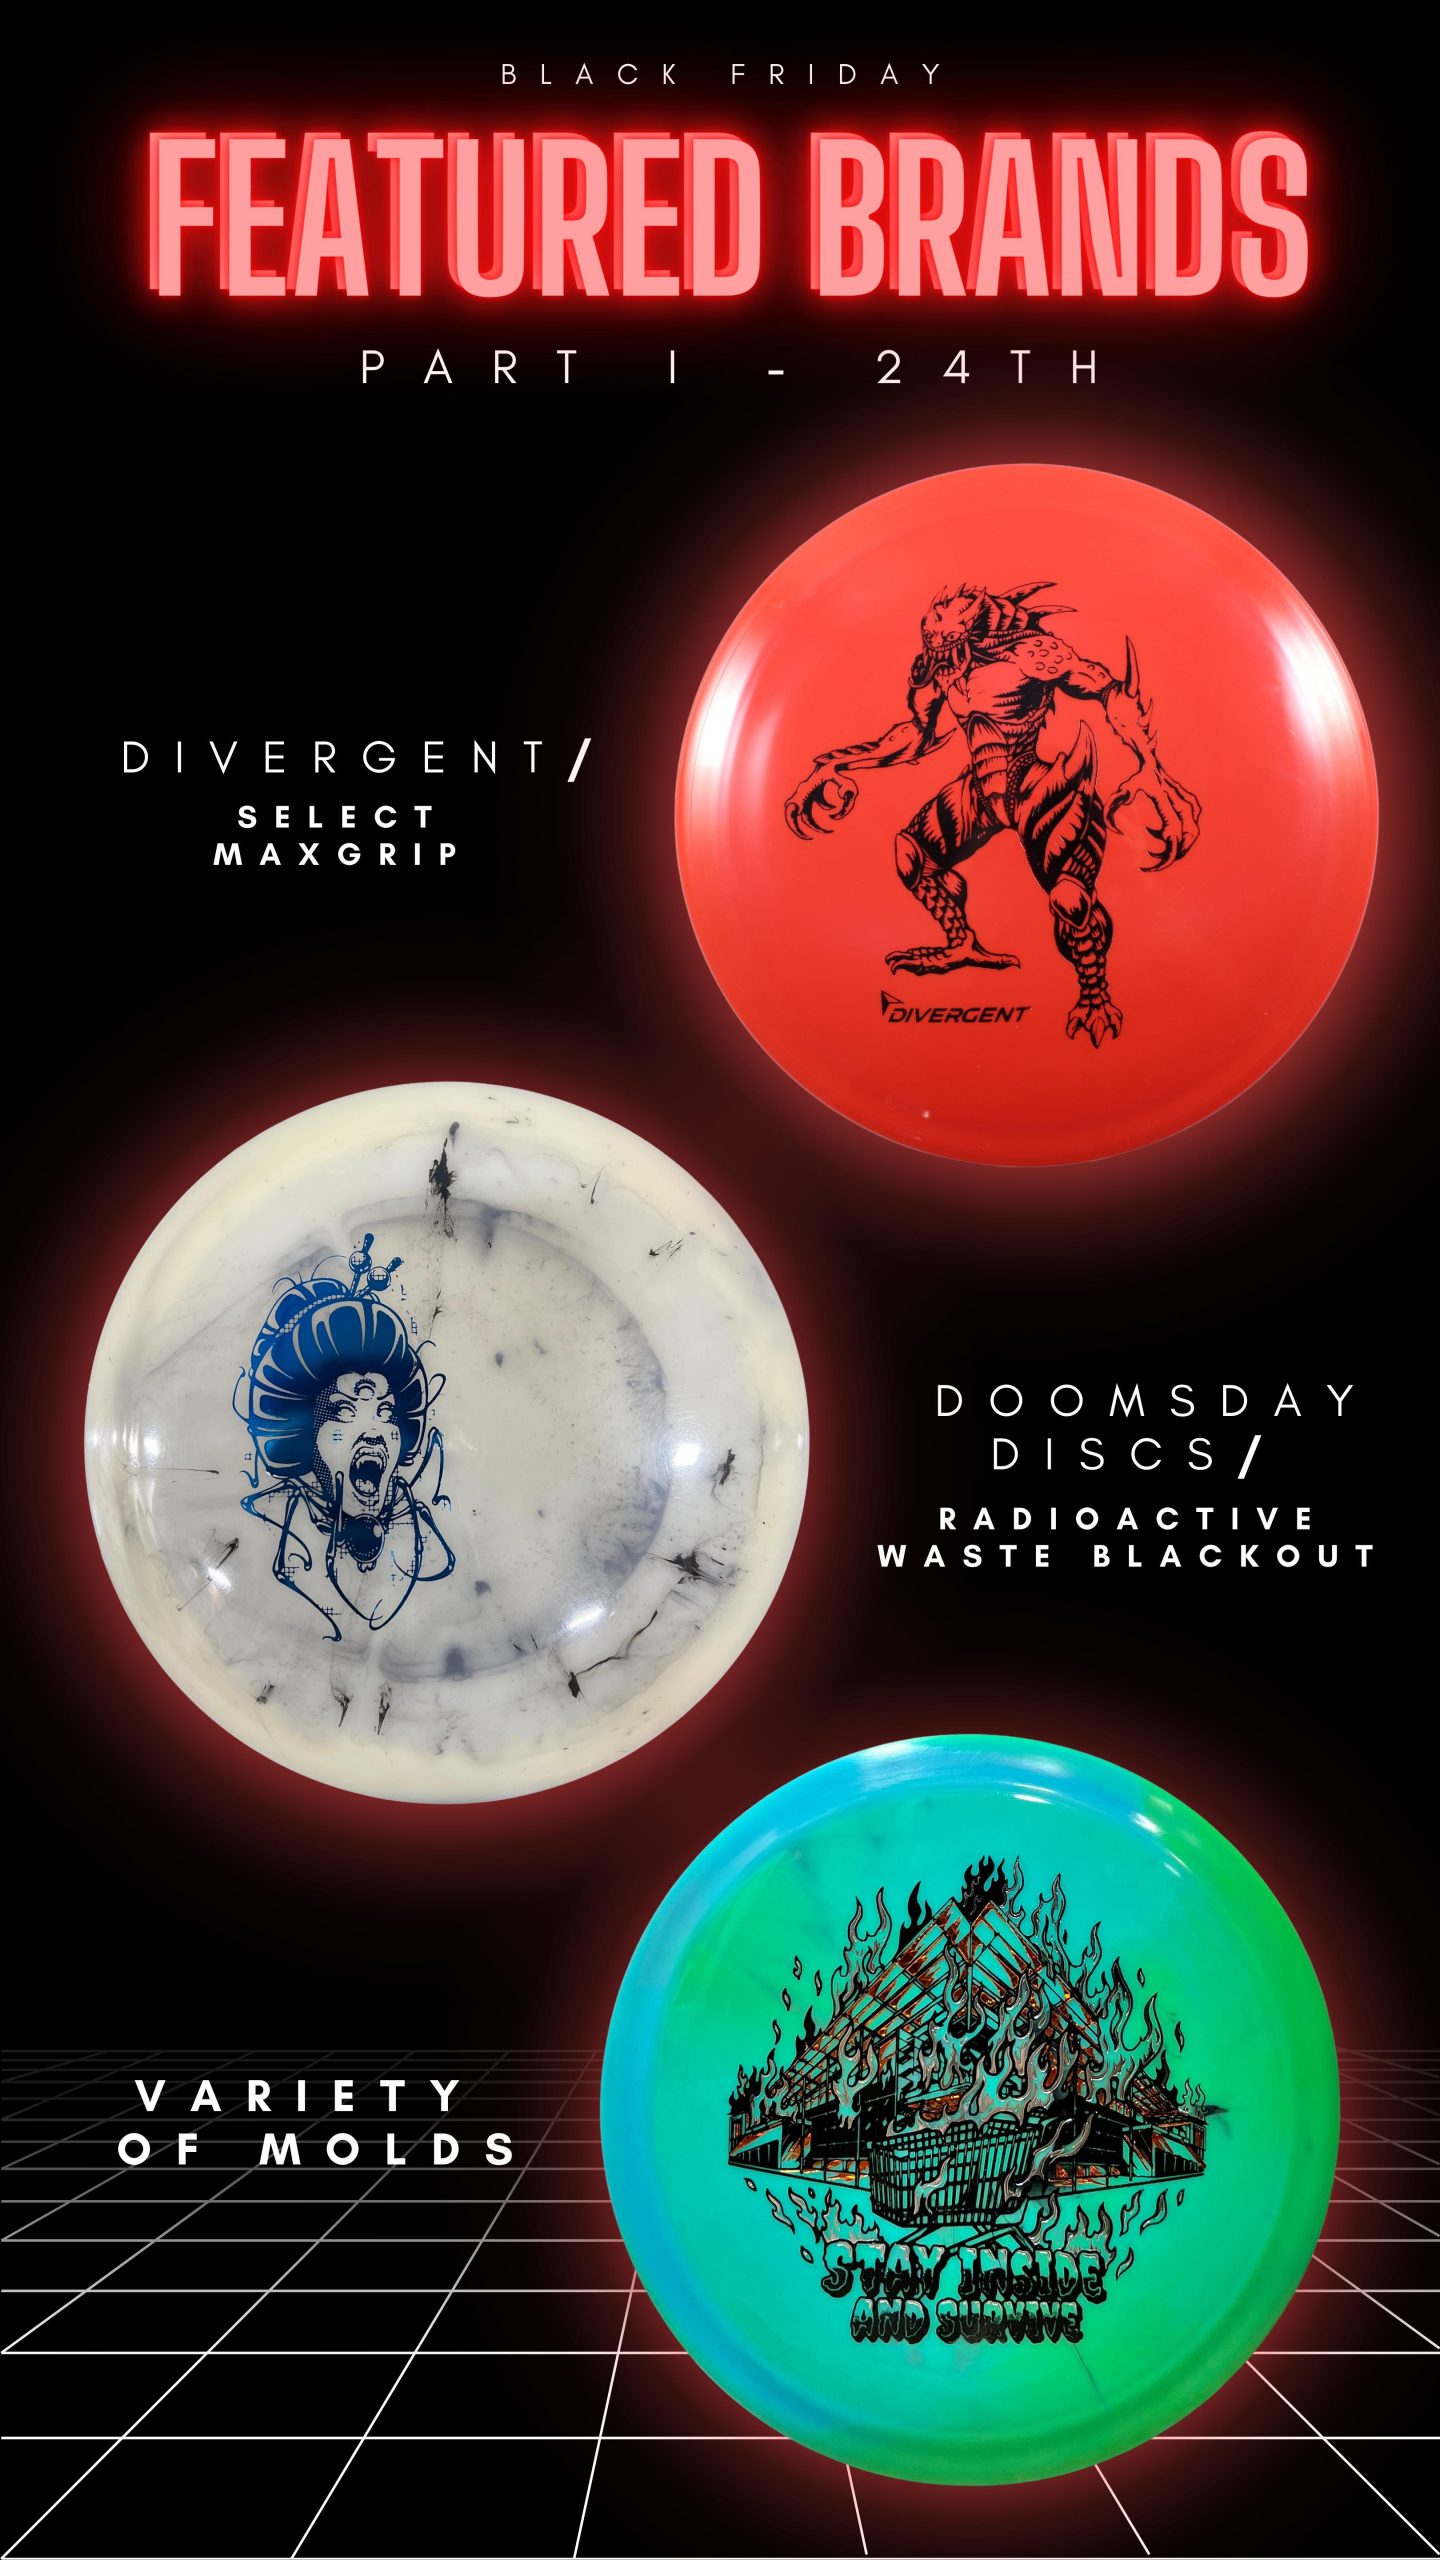 Divergent and Doomsday Discs exclusive Black Friday releases including triple foil dumpster fire stamp.